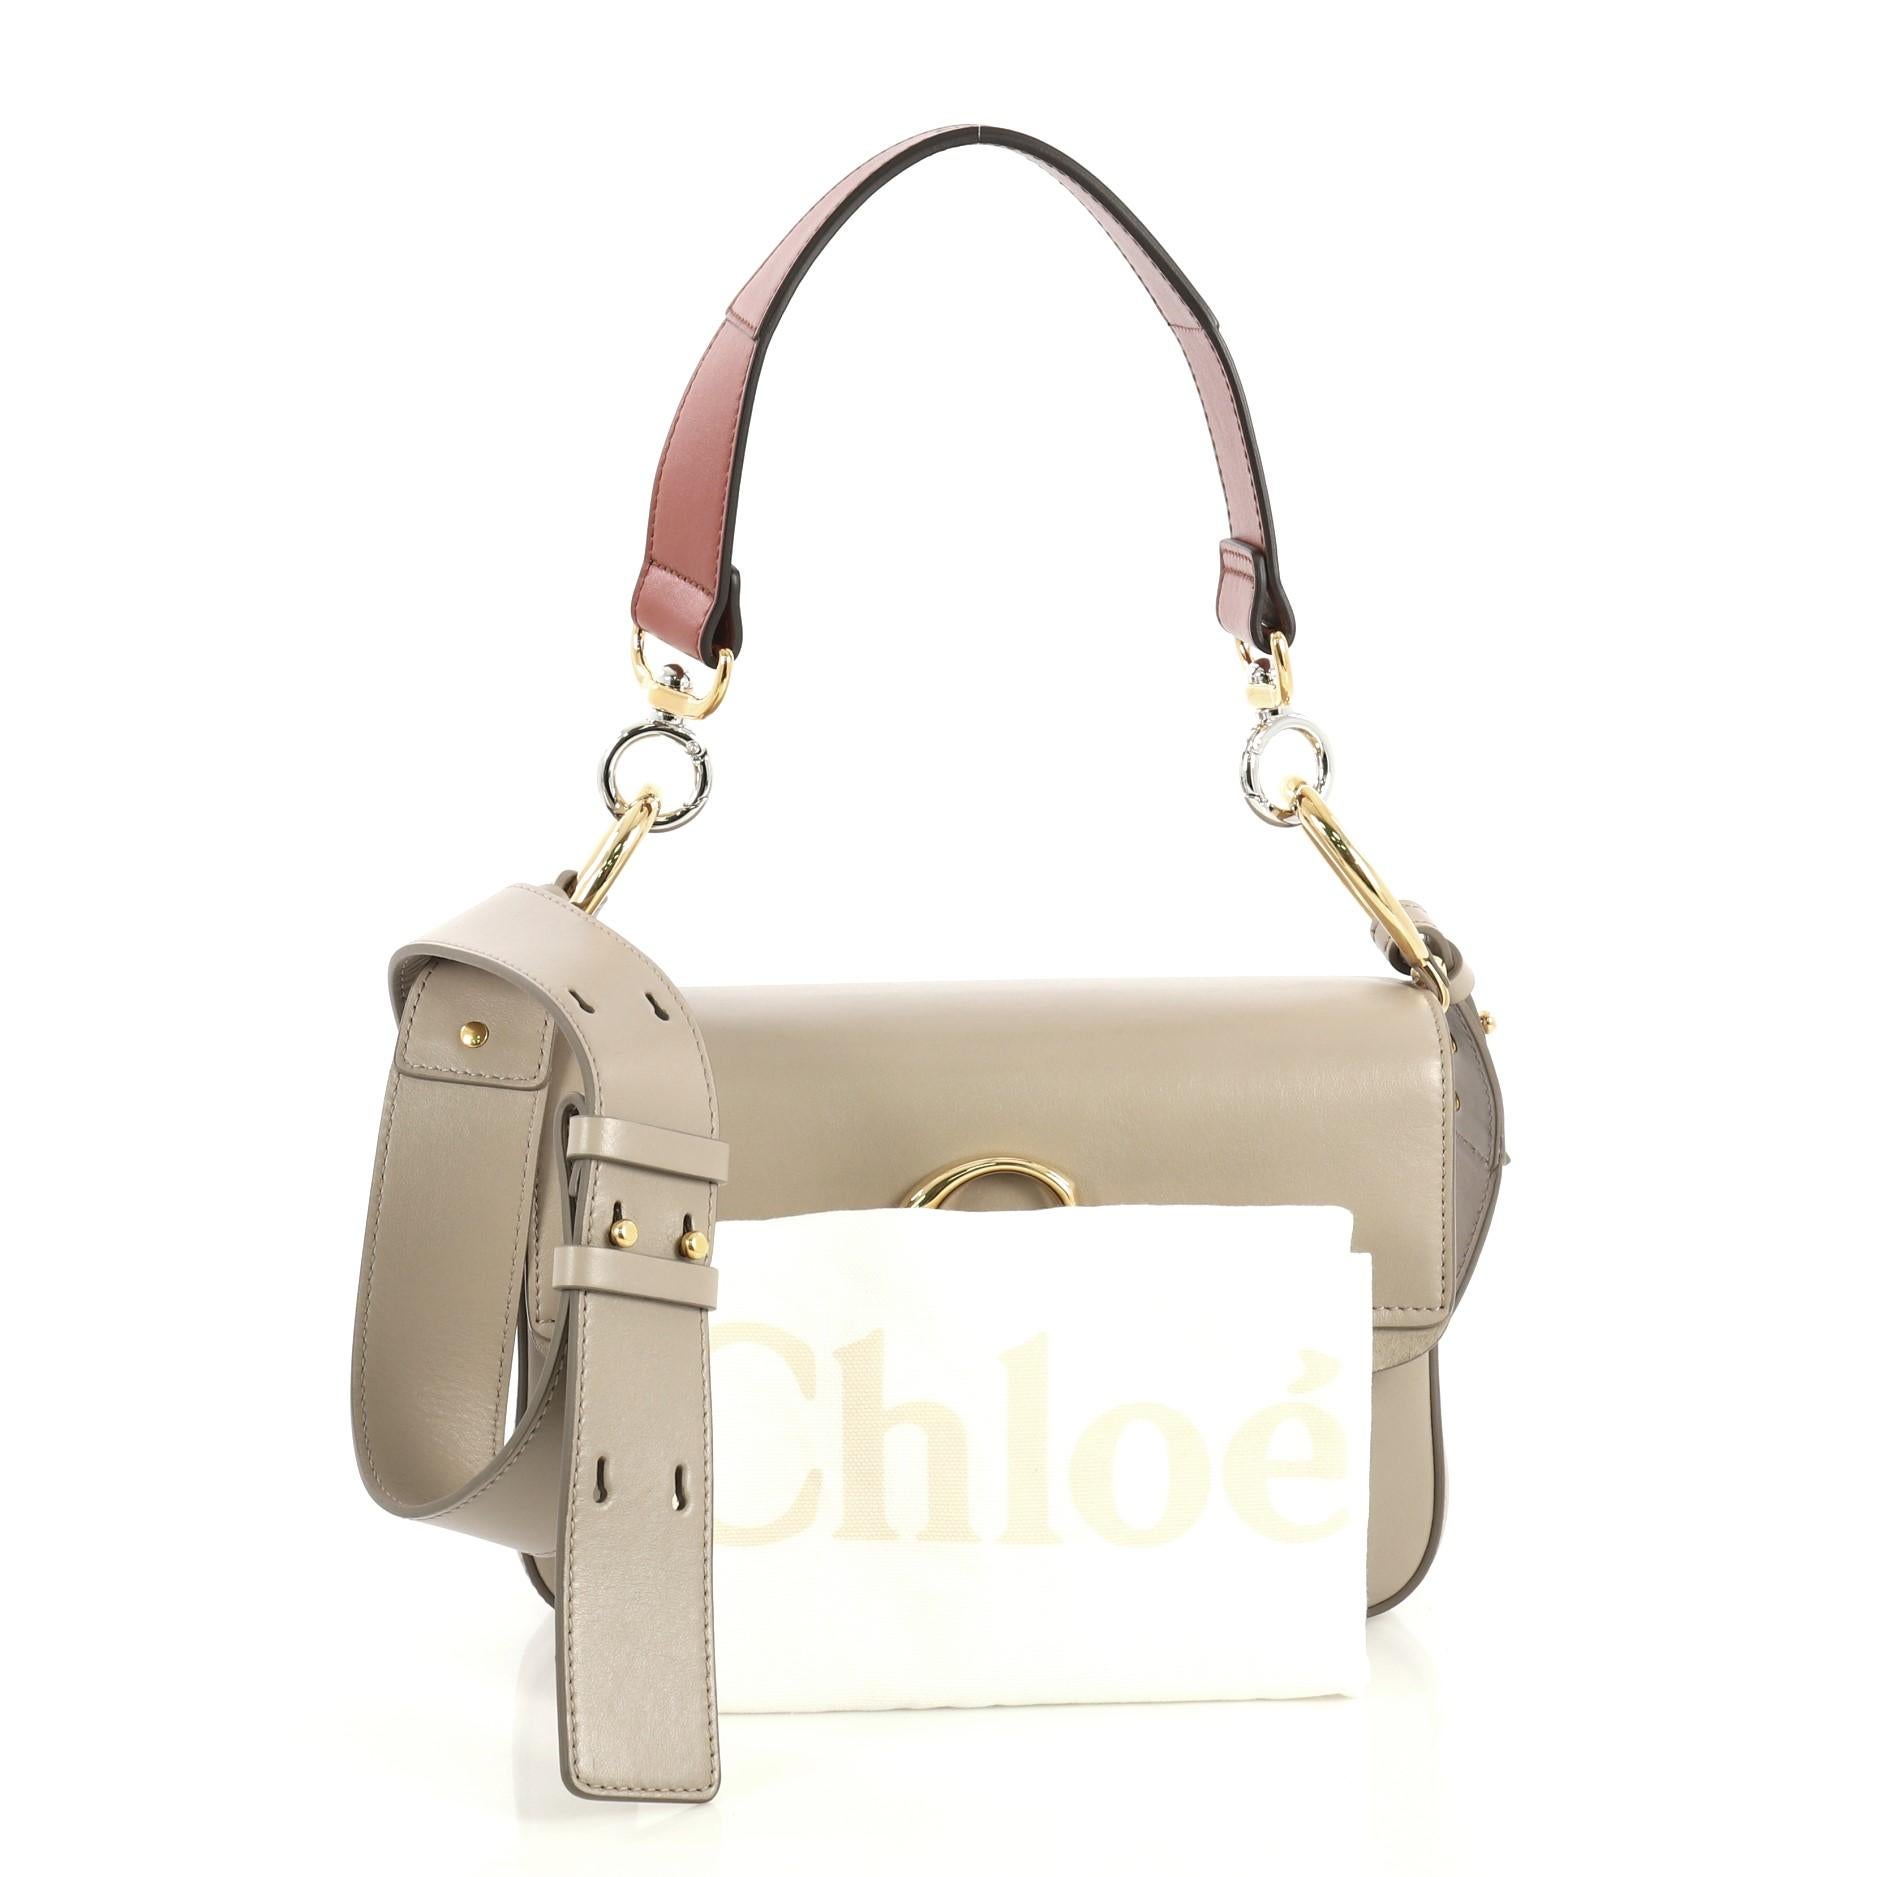 This Chloe C Double Carry Bag Leather Small, crafted in beige leather, features a flat leather strap, C logo on flap, and gold-tone hardware. Its push-lock closure opens to a neutral canvas interior with zip pocket. 

Estimated Retail Price: